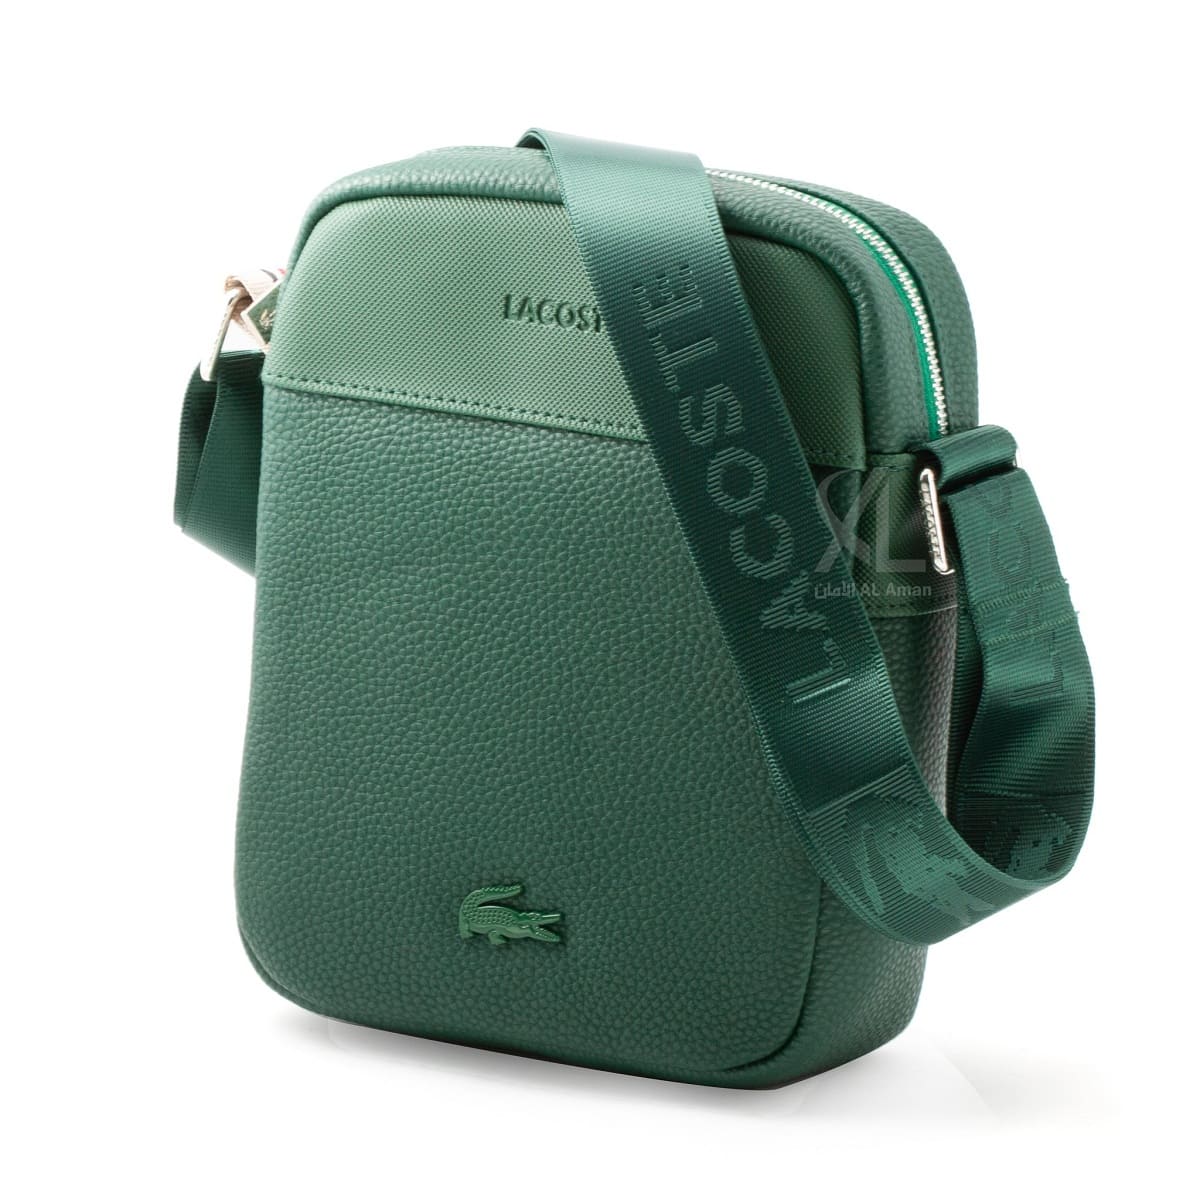 Lacoste-crossbag-with-hand-green-color-leather-for-men